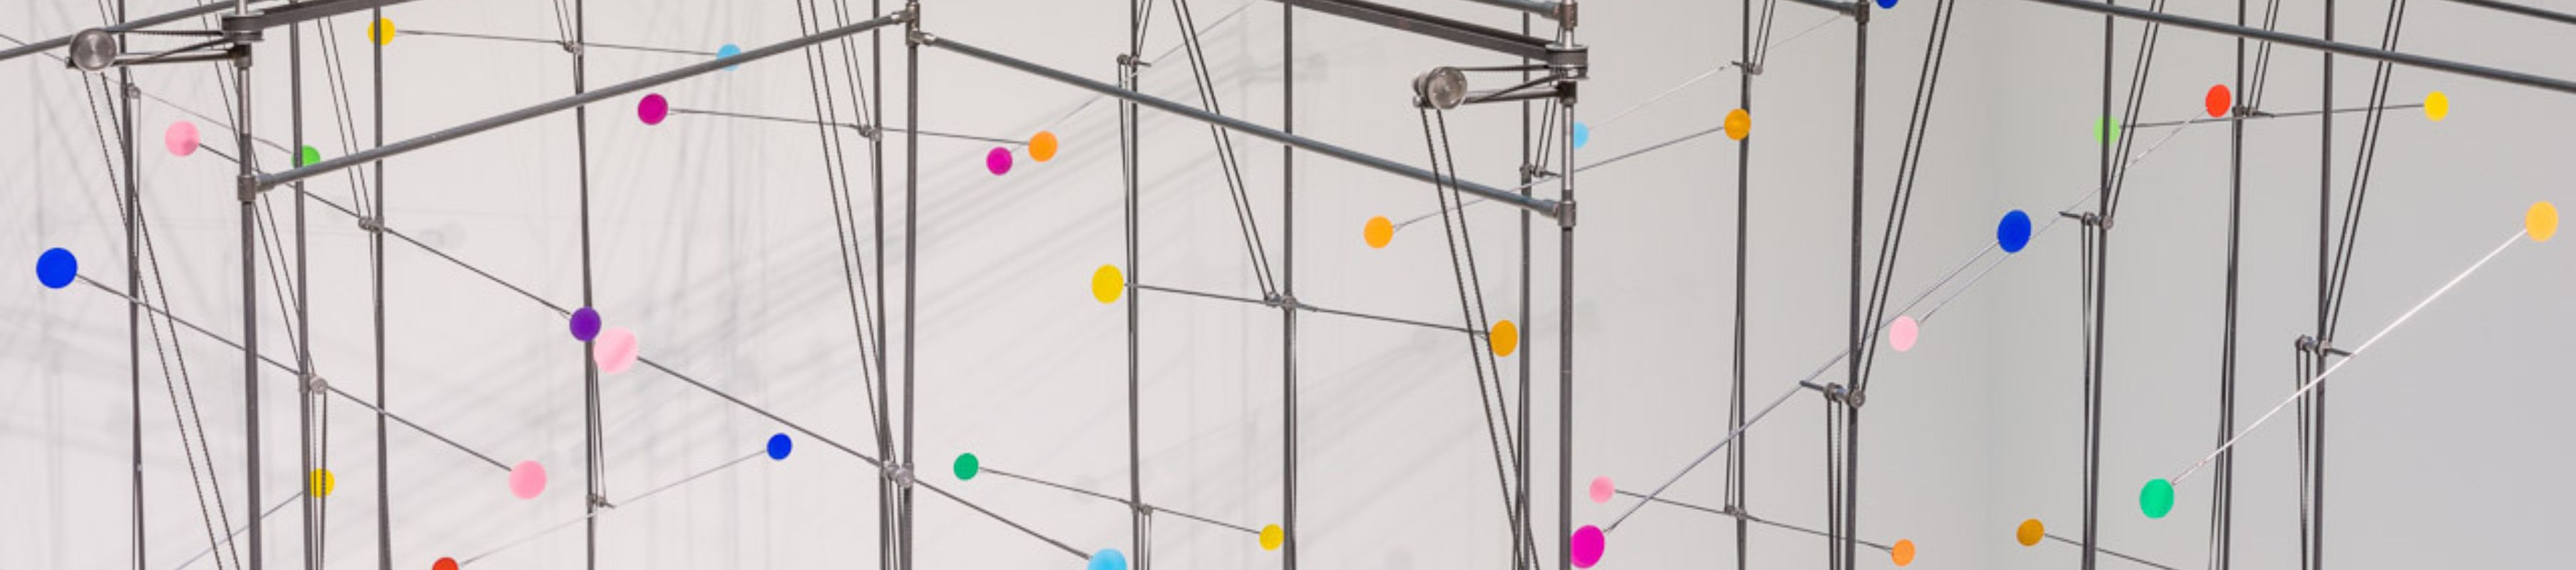 detail of Project Atrium: Juan Fontanive, which featured a hanging kinetic sculpture with colored dots on rods